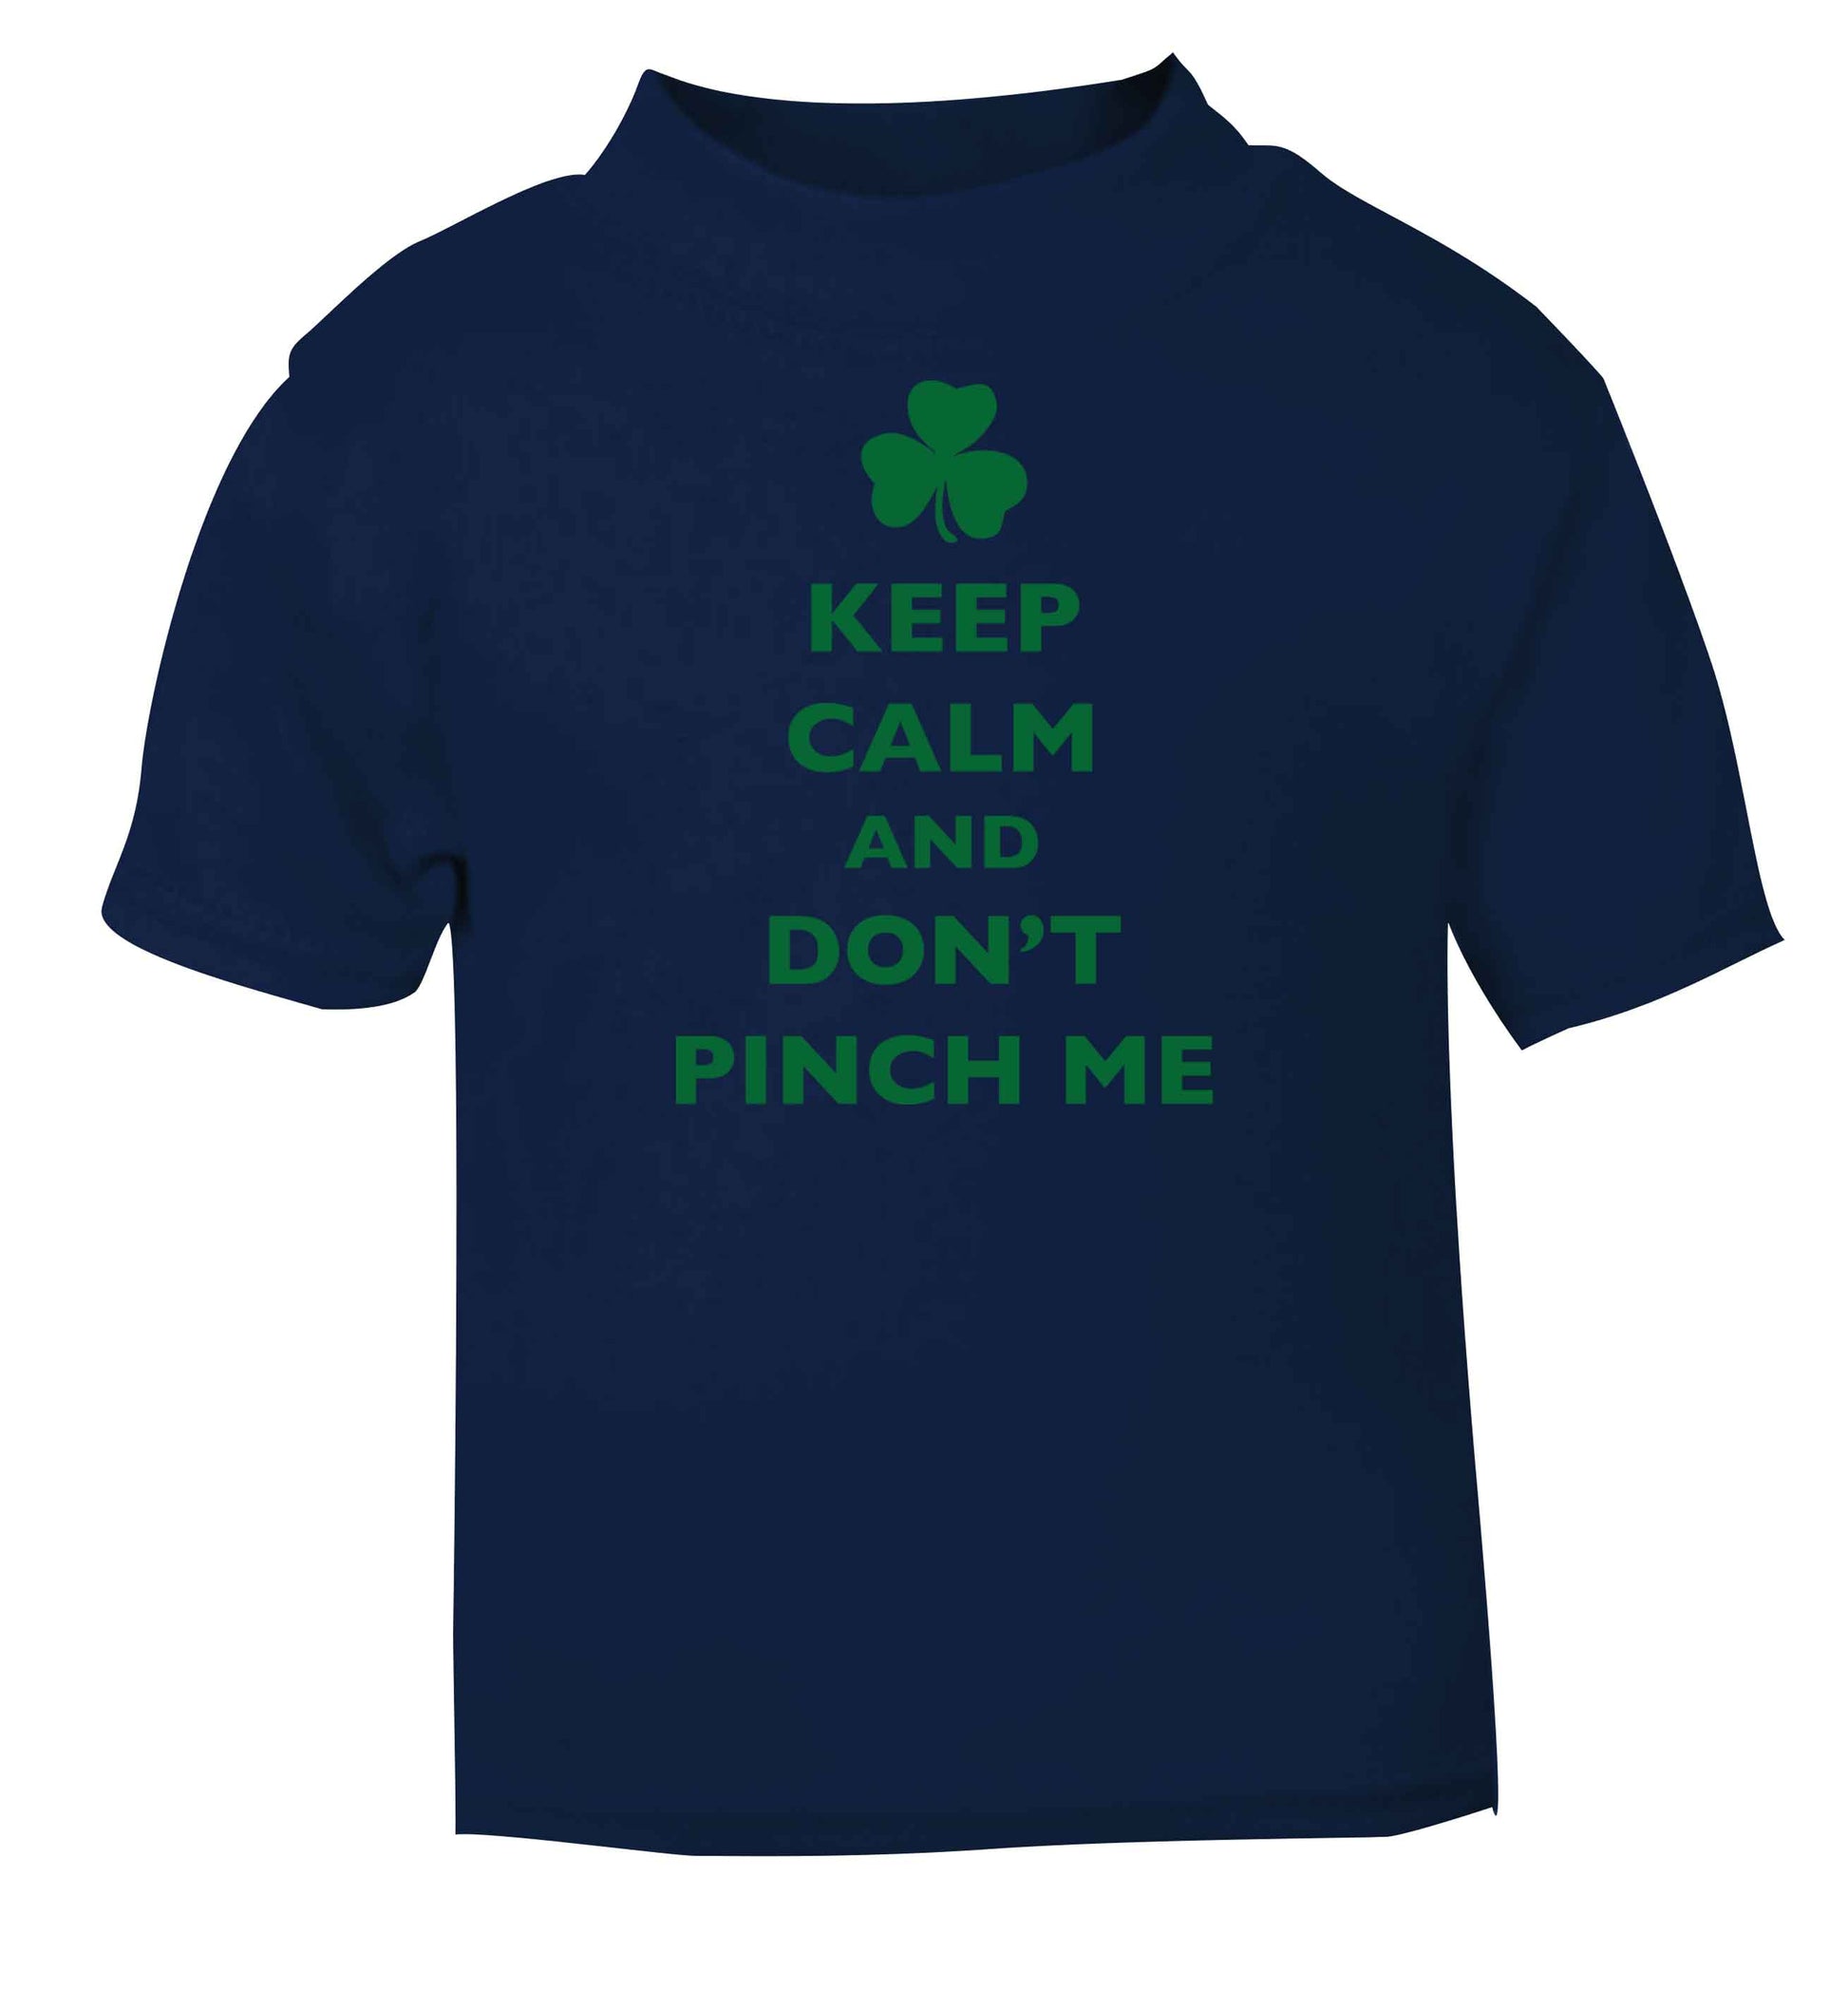 Keep calm and don't pinch me navy baby toddler Tshirt 2 Years